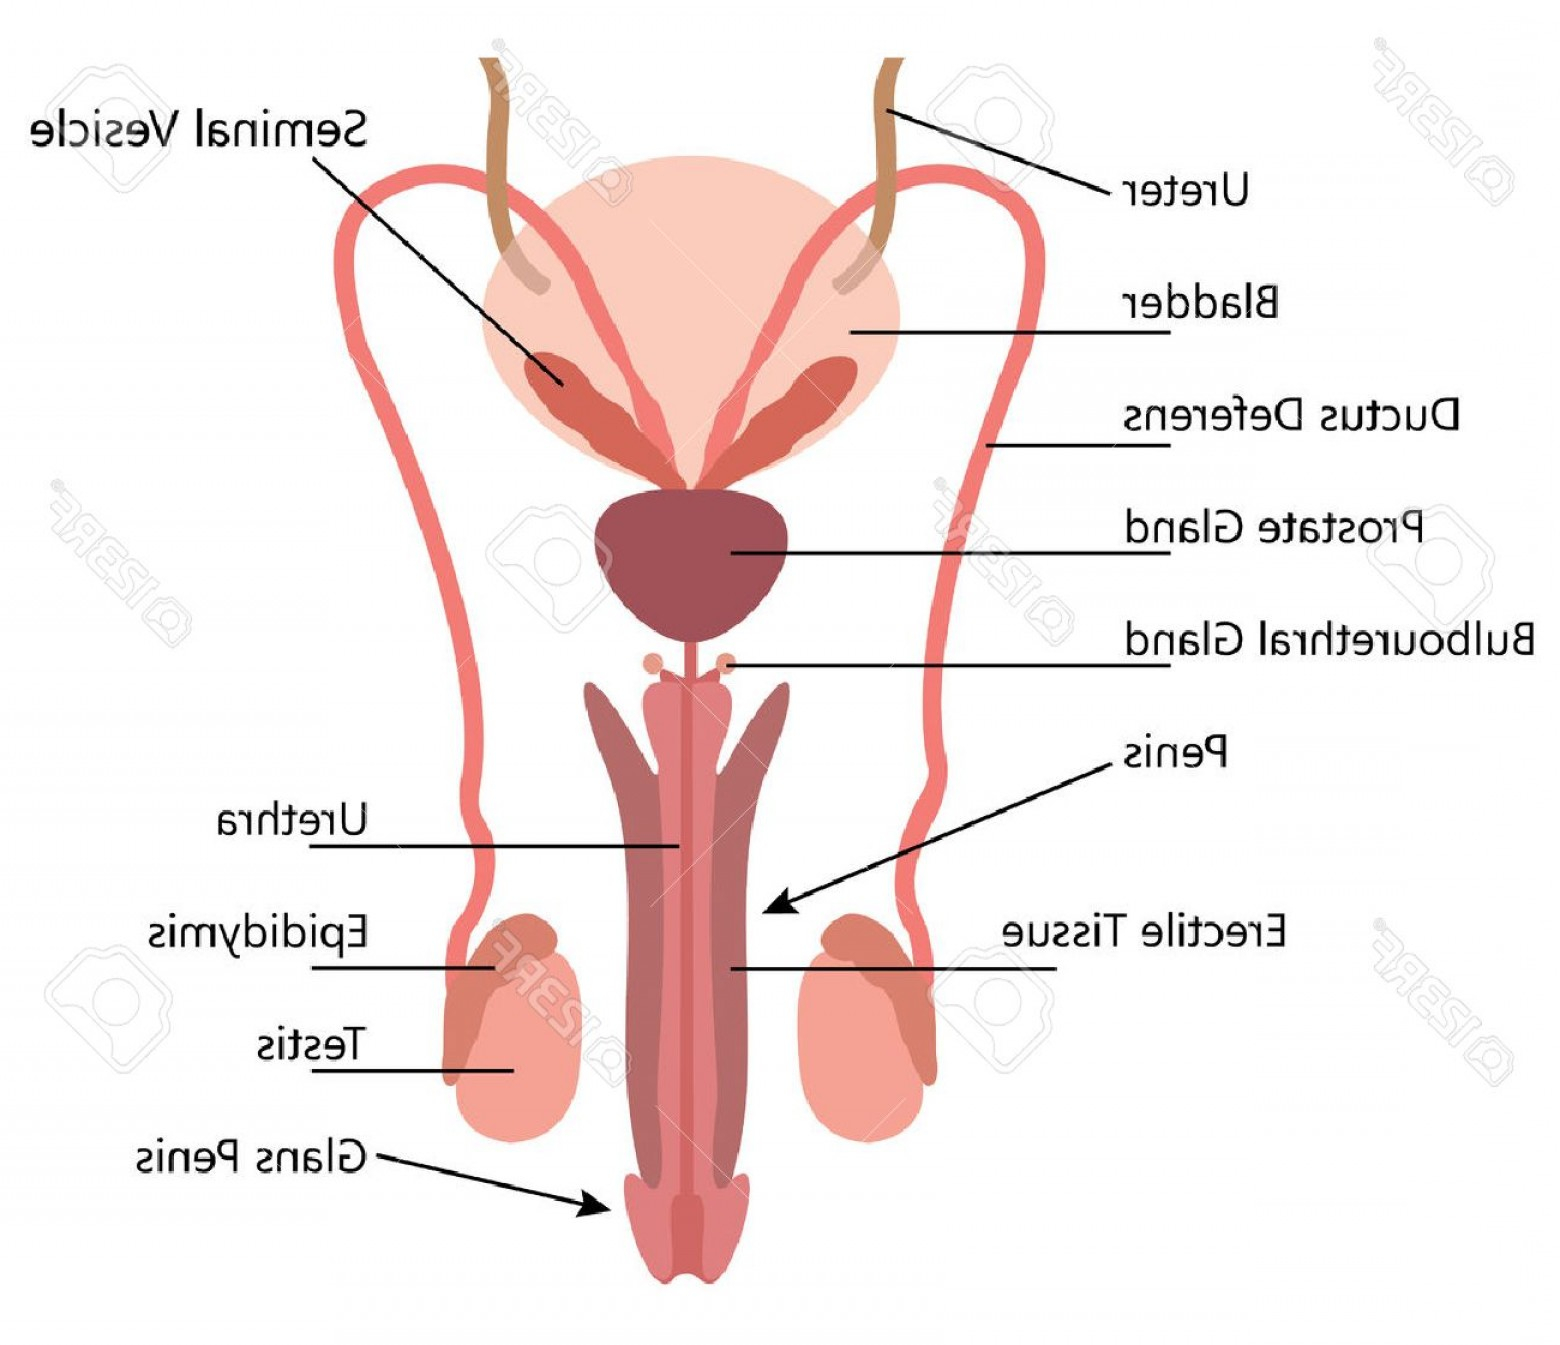 Male Reproductive System Diagram Photostock Vector Male Reproductive System Vector Diagram On White